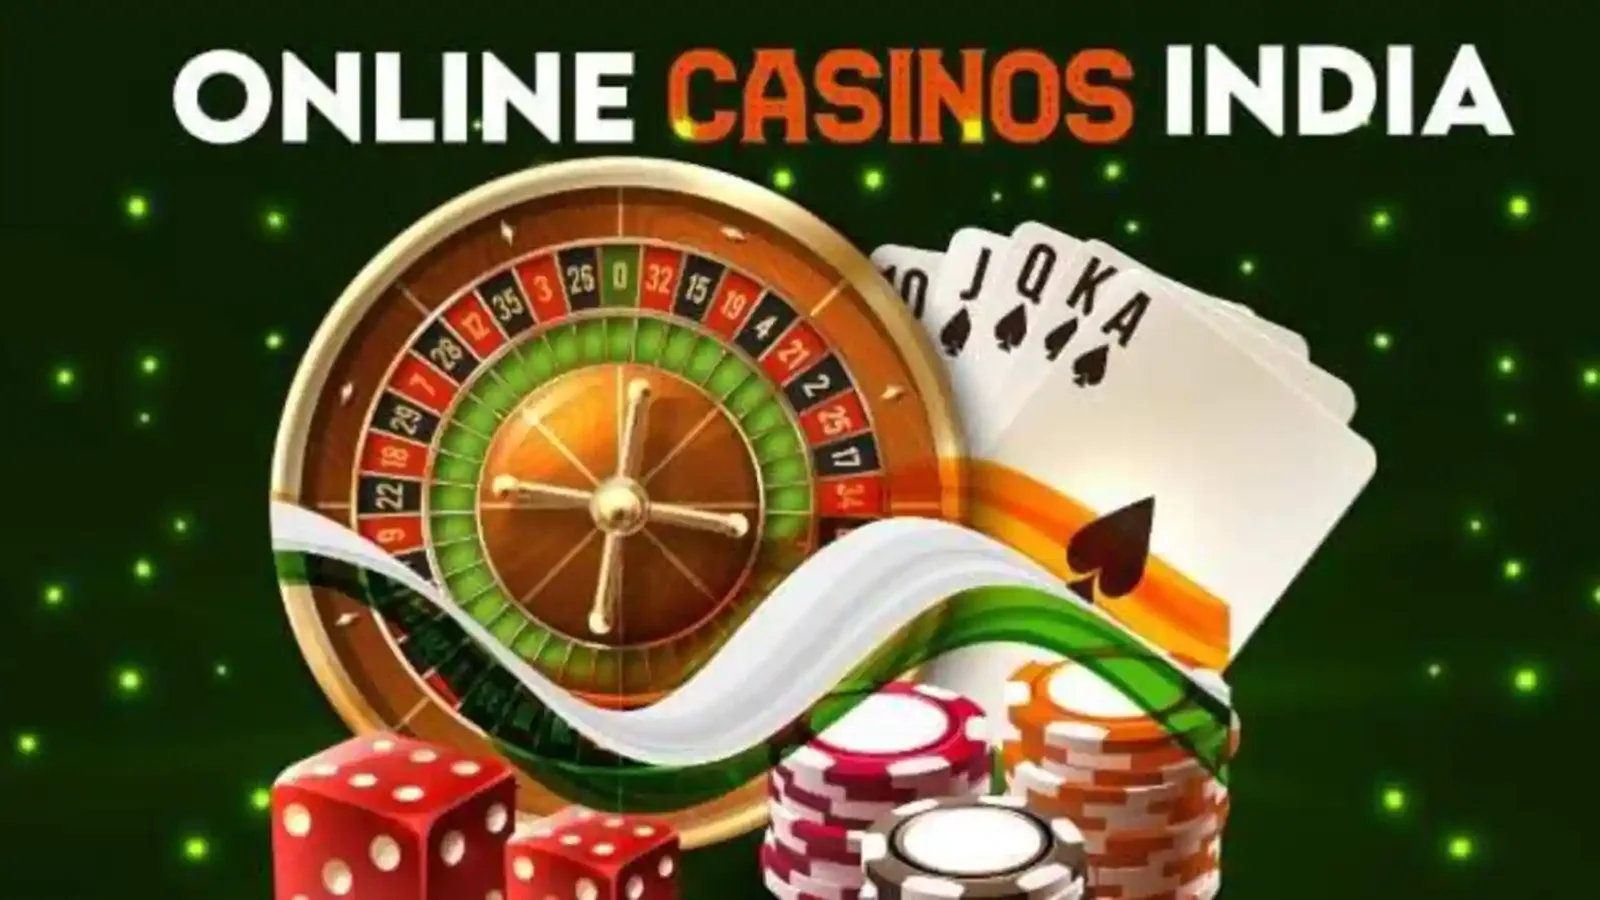 How to choose the best Online Casinos to Play in India?